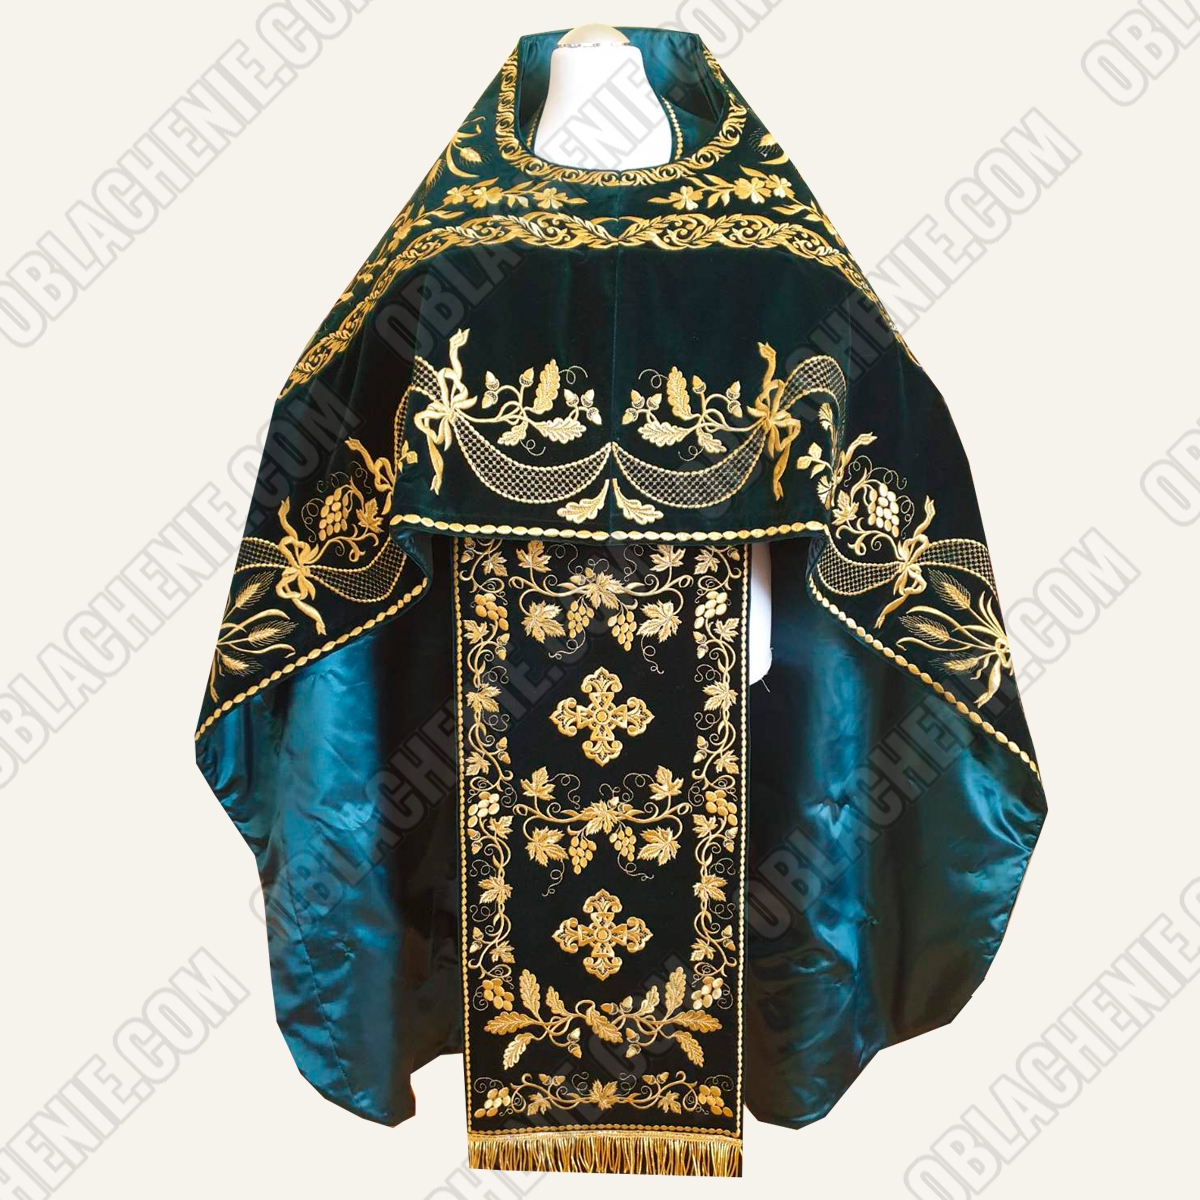 EMBROIDERED PRIEST'S VESTMENTS 11074